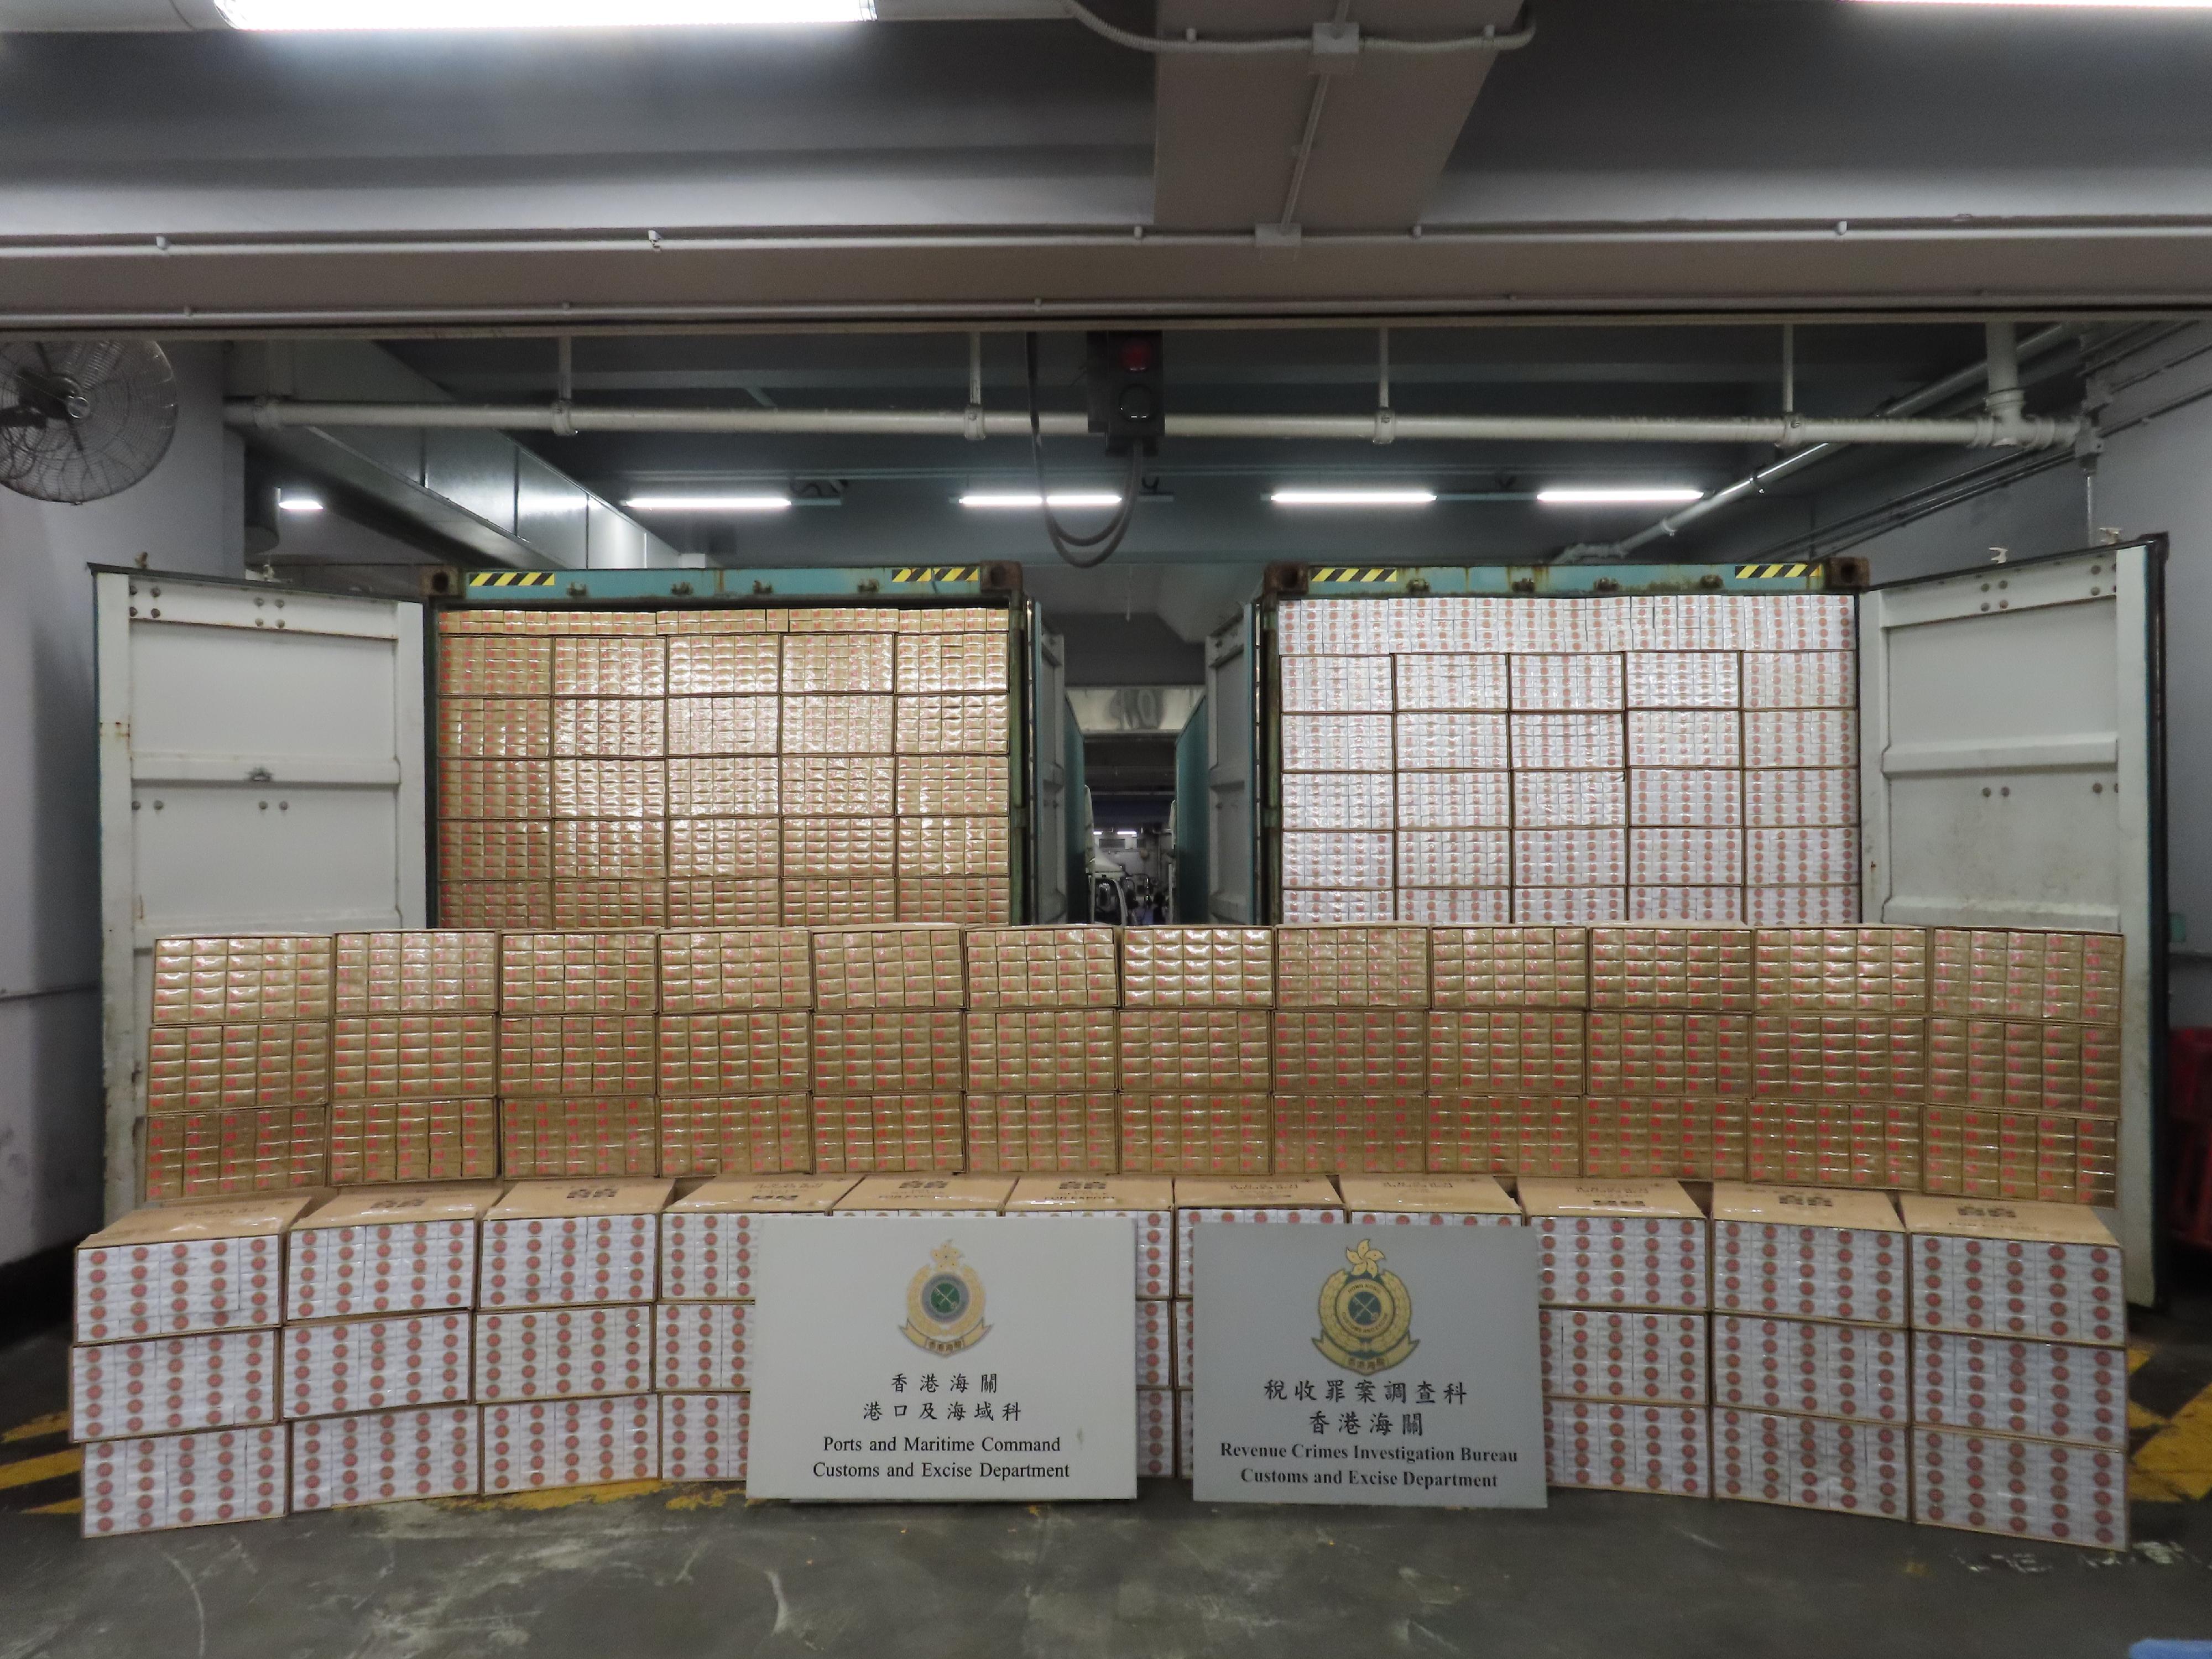 Hong Kong Customs on May 2 inspected two 40-foot containers, declared as carrying furniture and arriving in Hong Kong from Taiwan, at the Kwai Chung Customhouse Cargo Examination Compound. A total of about 11 million suspected illicit cigarettes were seized therein. Photo shows the suspected illicit cigarettes seized.